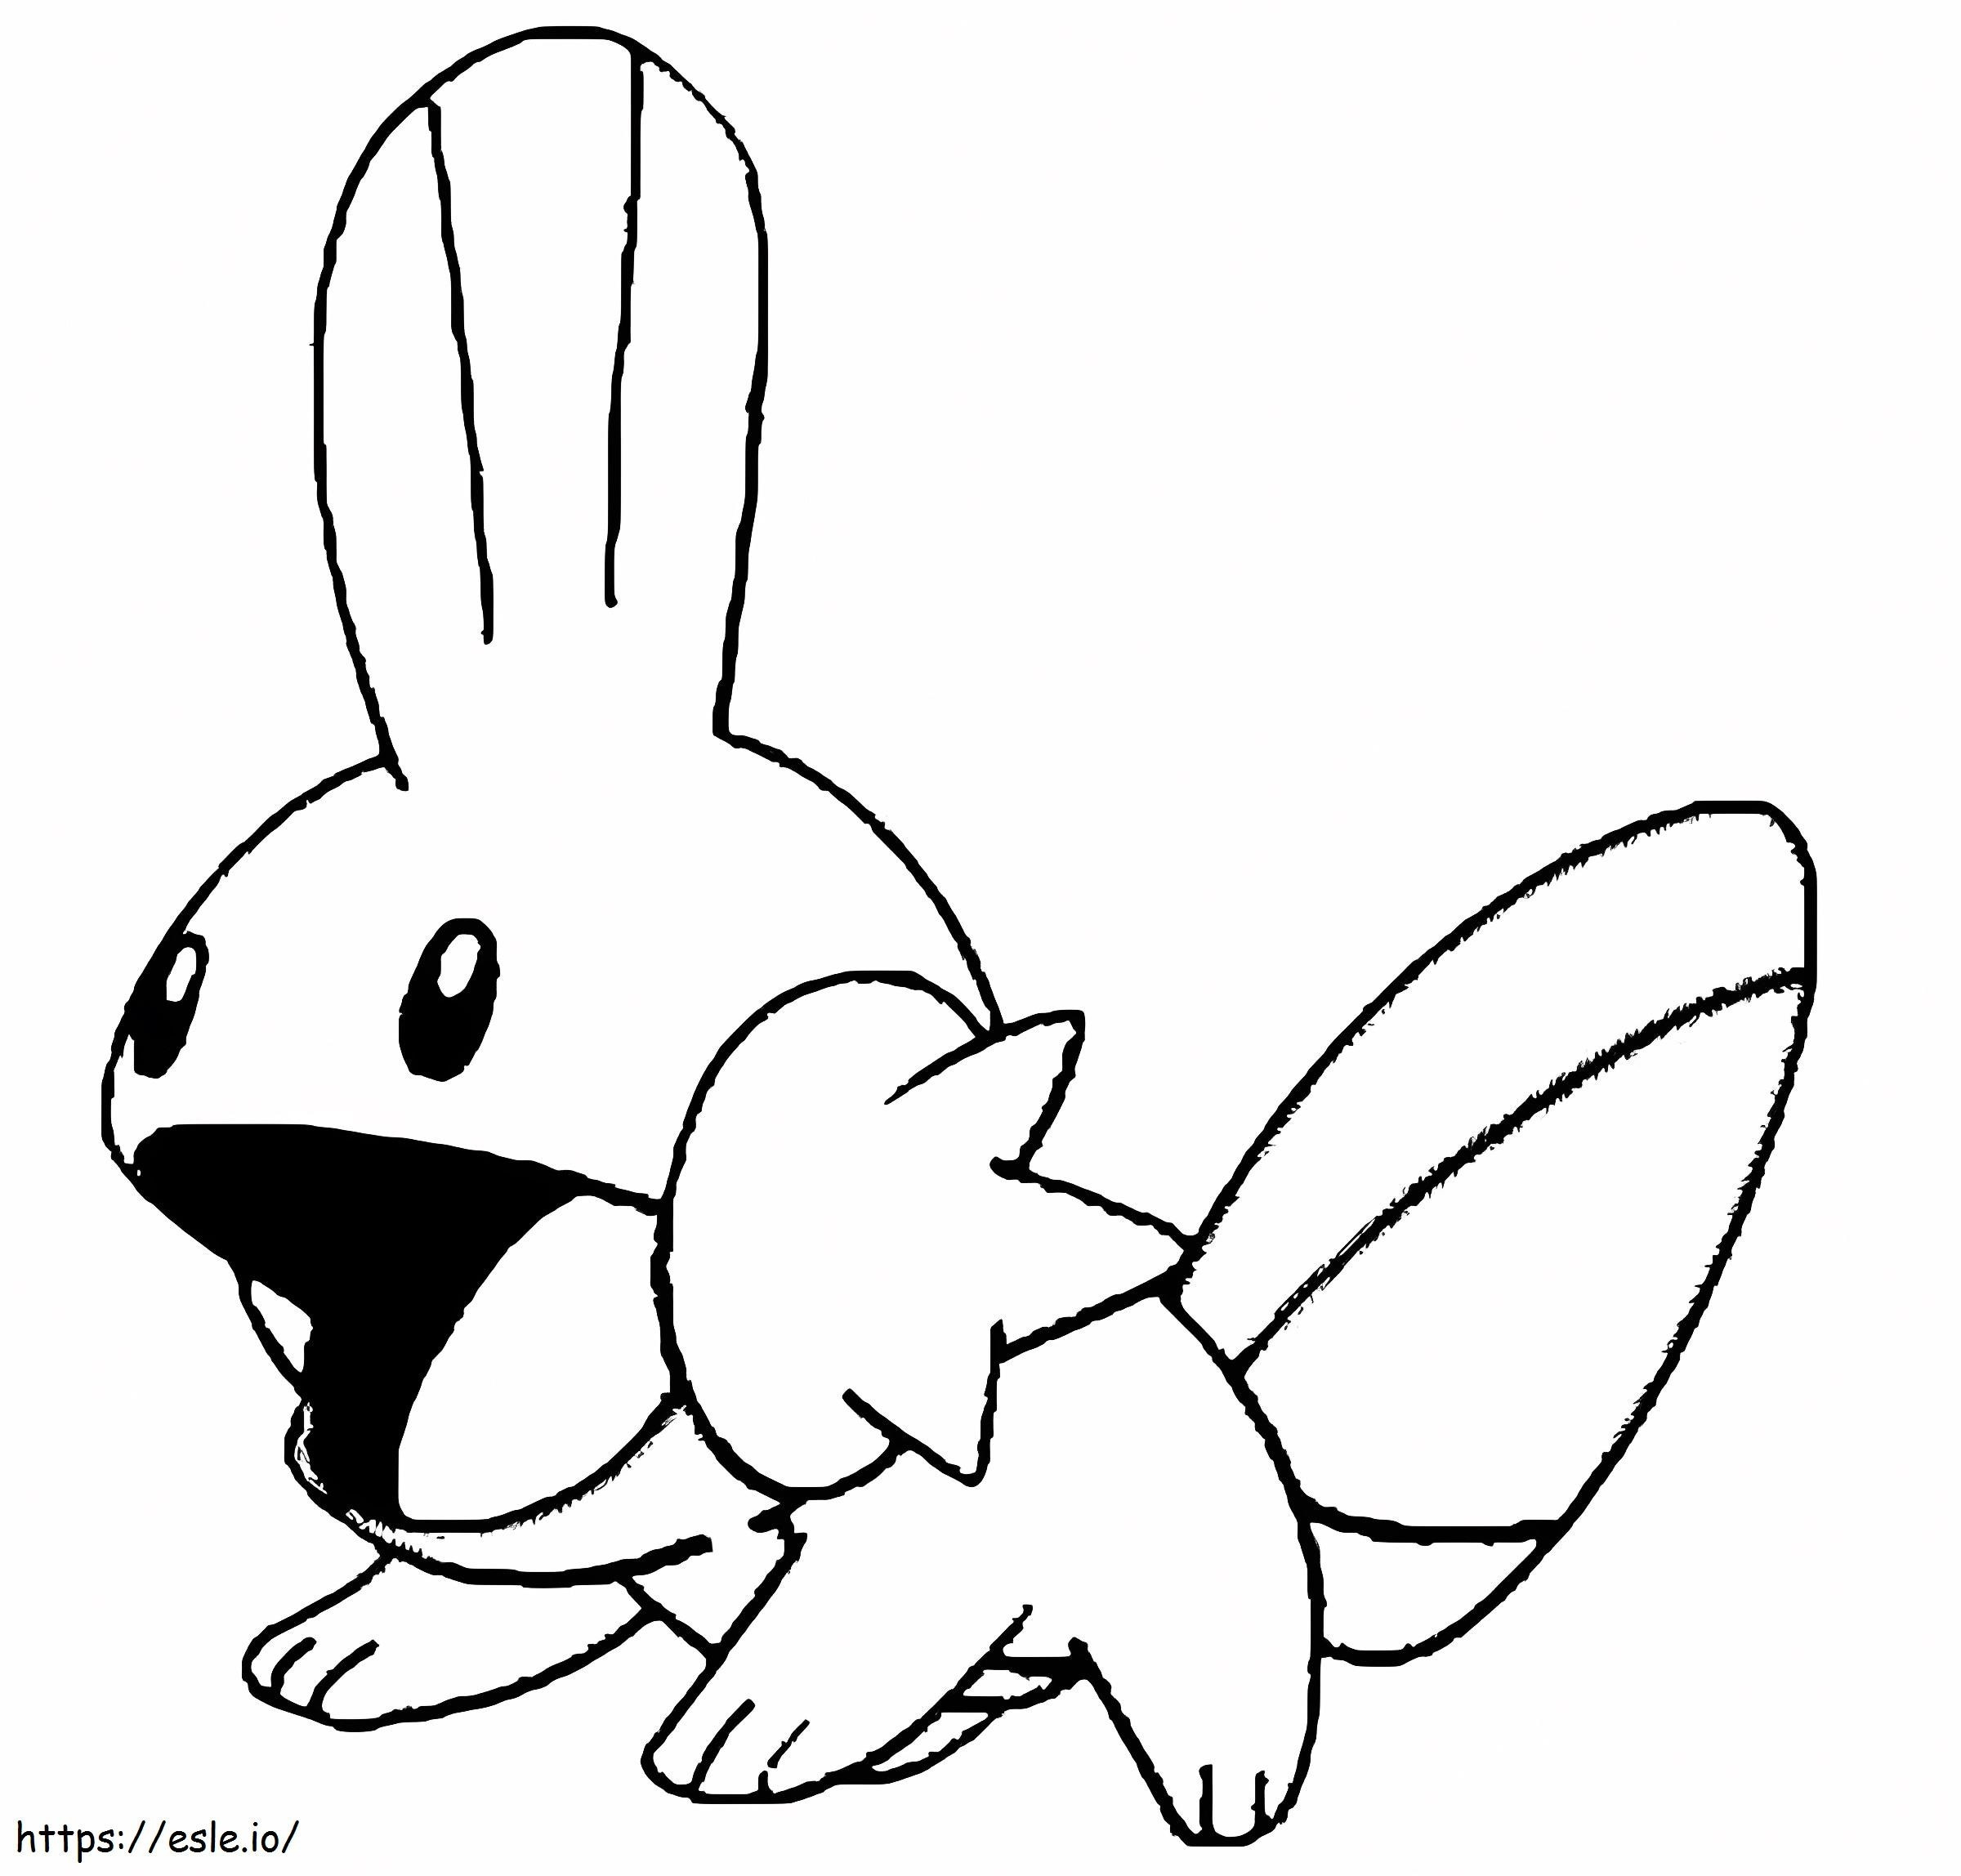 Funny Mudkip coloring page